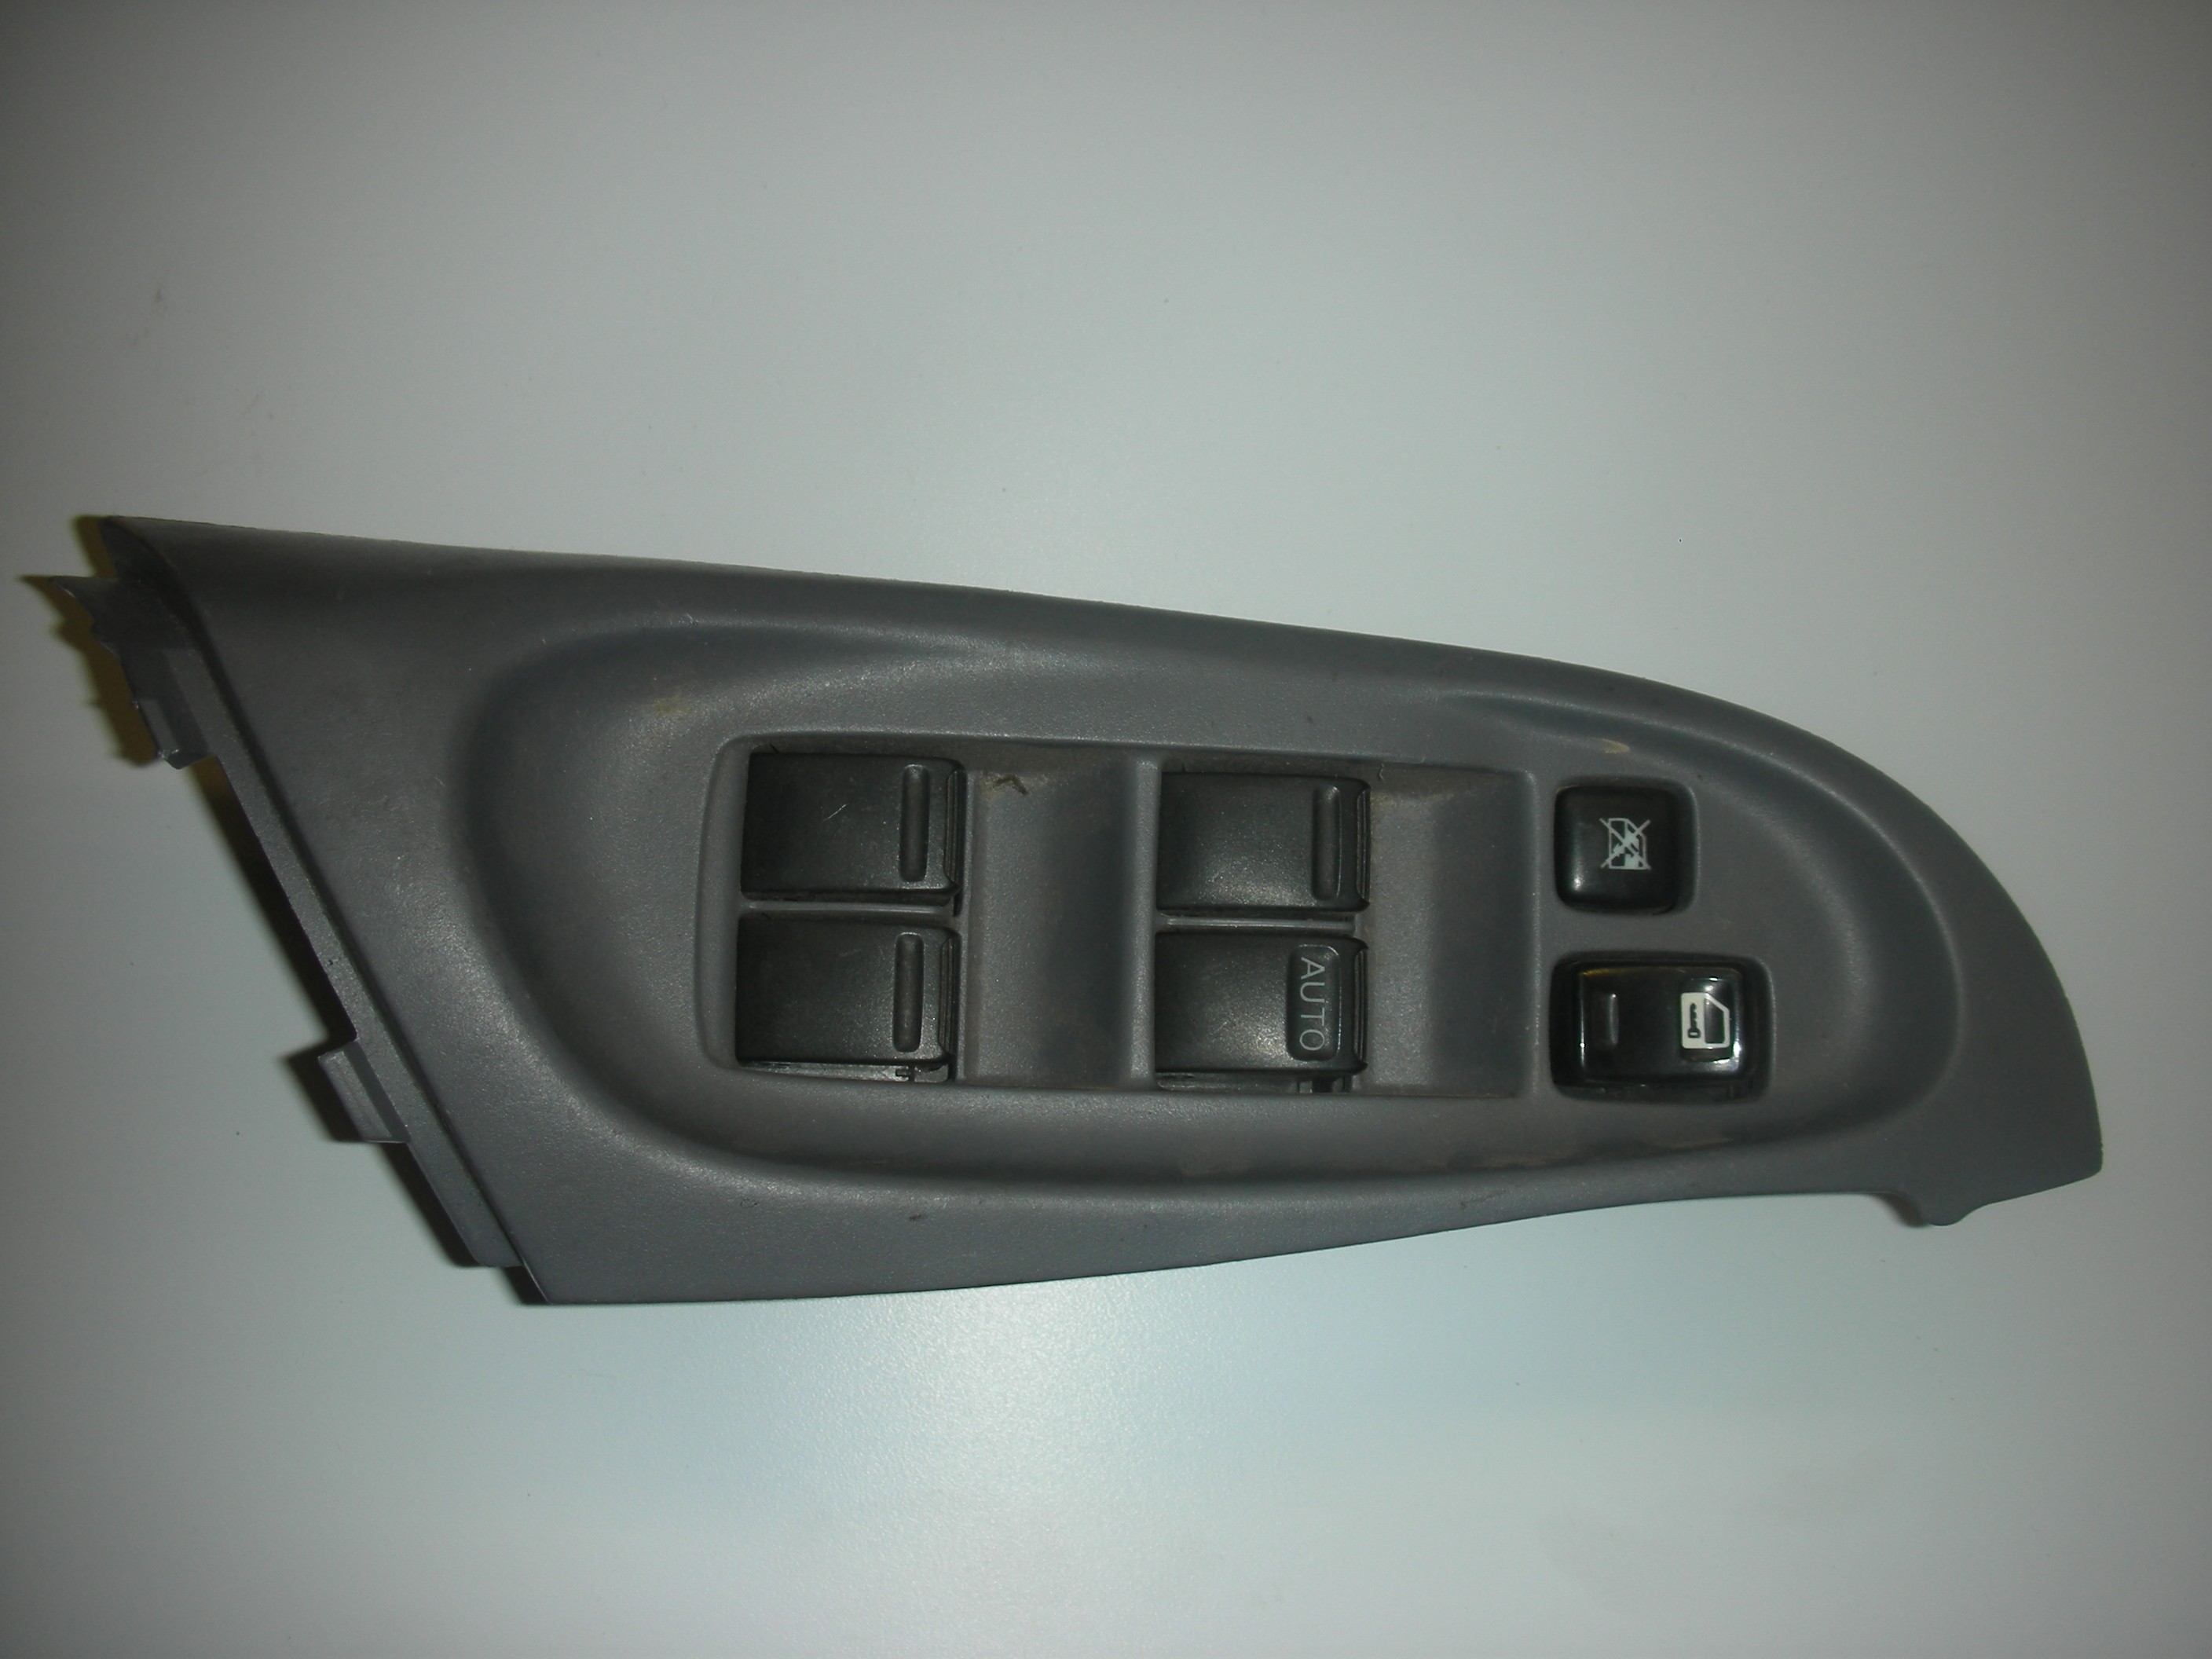 NISSAN ALMERA DRIVER SIDE FRONT WINDOW SWITCHES 2004-2006